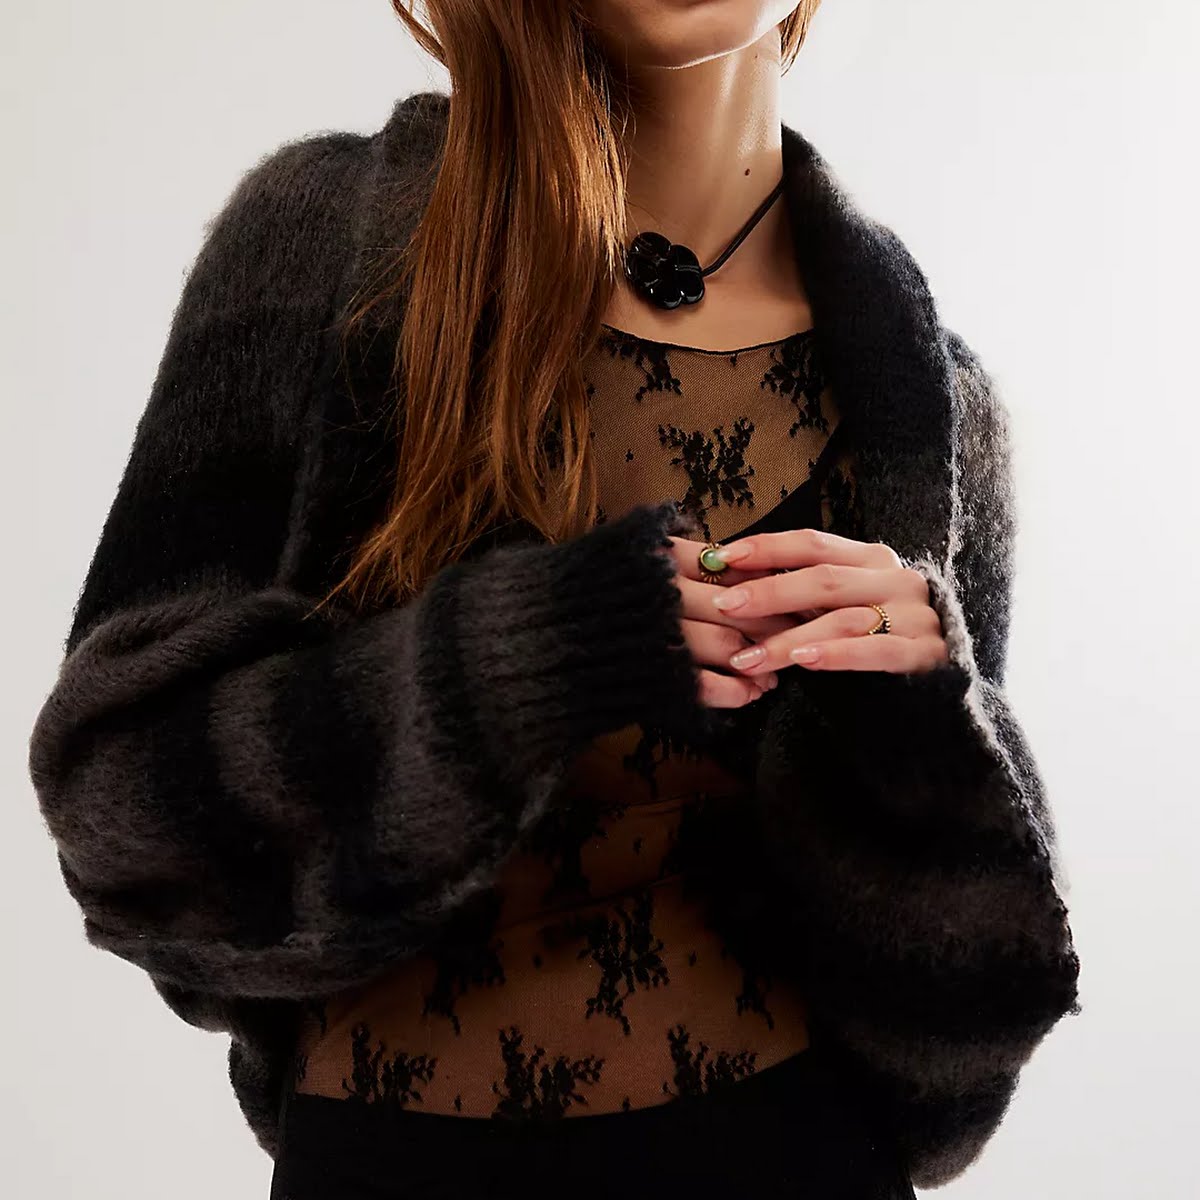 Free People Ombre Shrug, €92.12